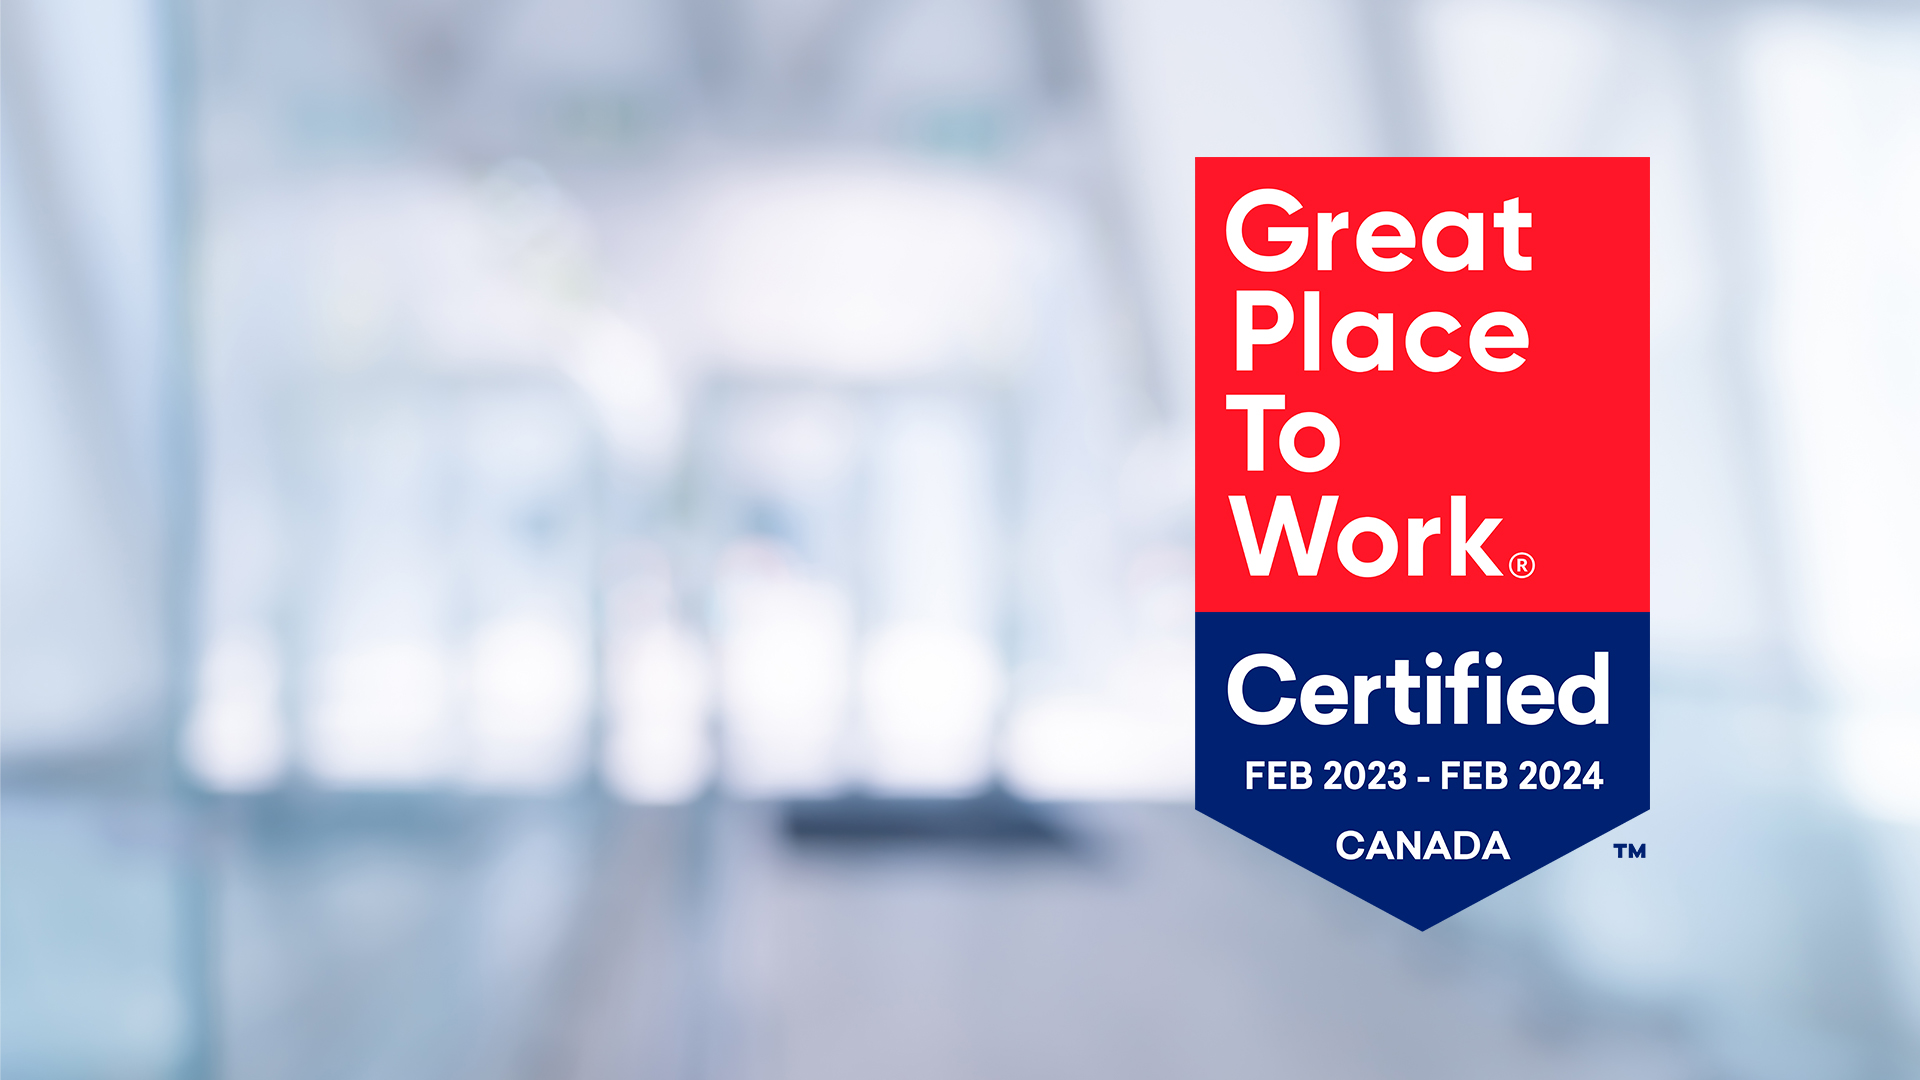 A banner image with the Great Place to Work badge